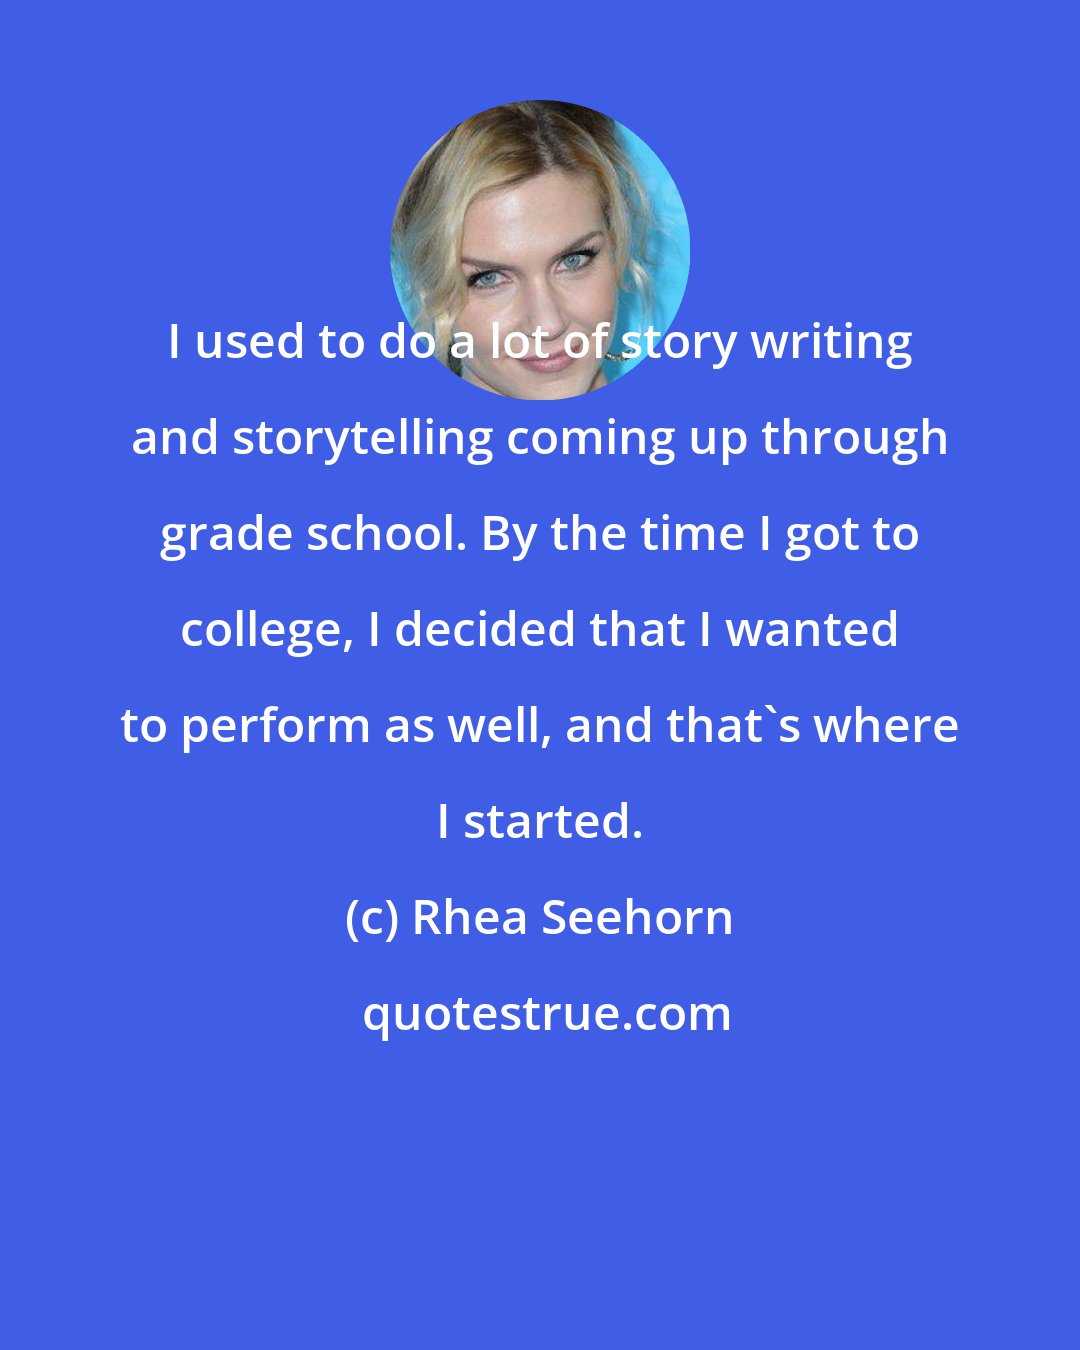 Rhea Seehorn: I used to do a lot of story writing and storytelling coming up through grade school. By the time I got to college, I decided that I wanted to perform as well, and that's where I started.